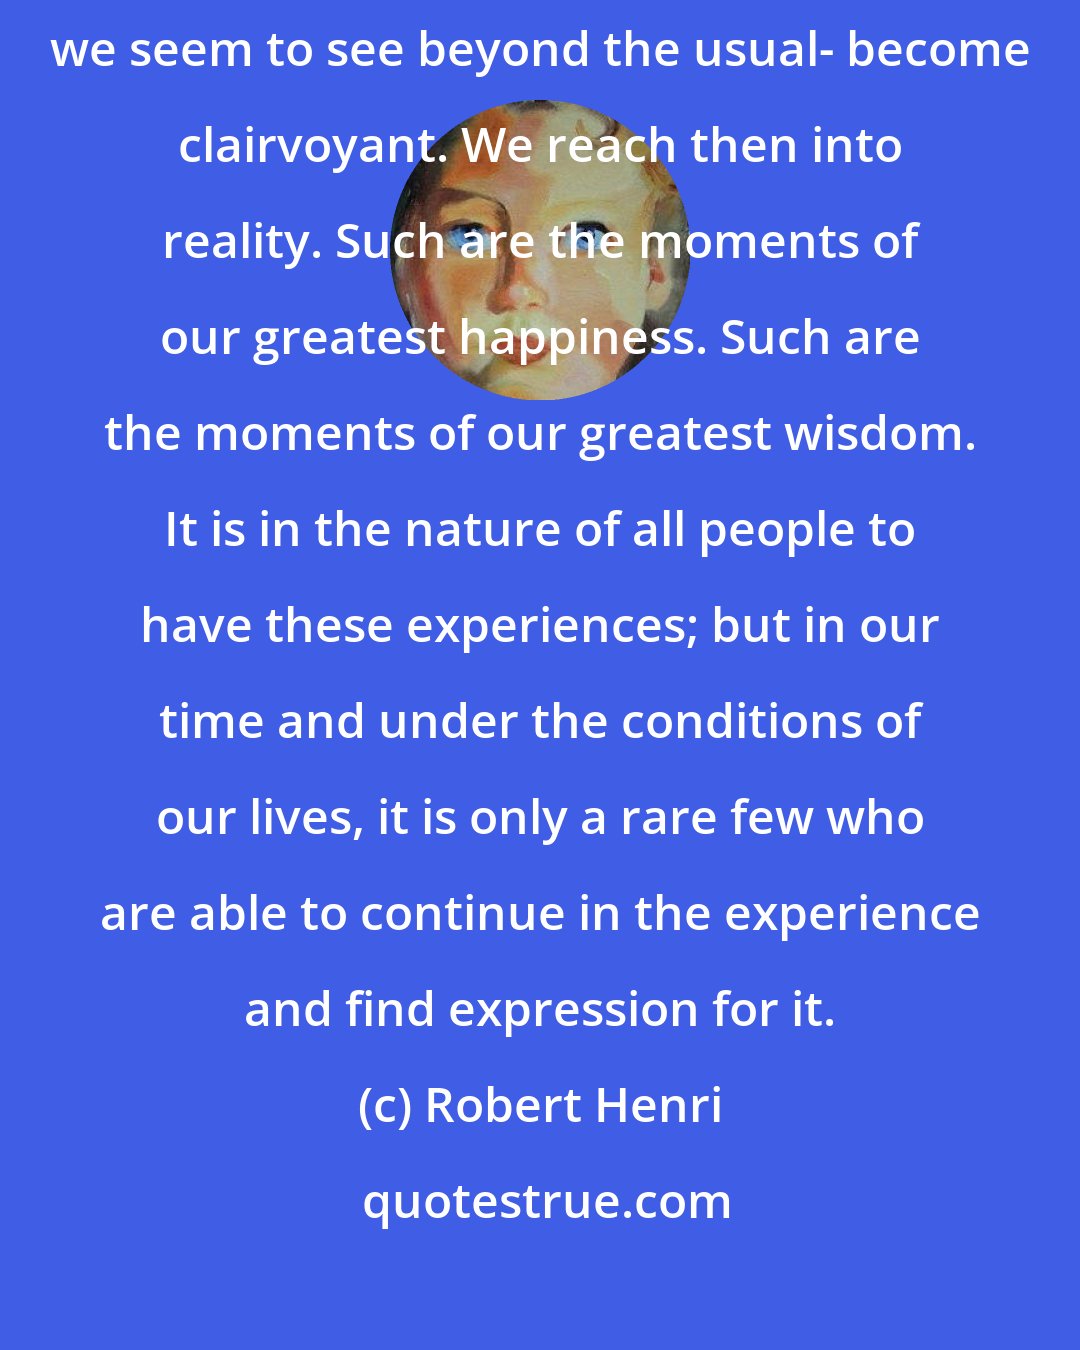 Robert Henri: There are moments in our lives, there are moments in a day, when we seem to see beyond the usual- become clairvoyant. We reach then into reality. Such are the moments of our greatest happiness. Such are the moments of our greatest wisdom. It is in the nature of all people to have these experiences; but in our time and under the conditions of our lives, it is only a rare few who are able to continue in the experience and find expression for it.